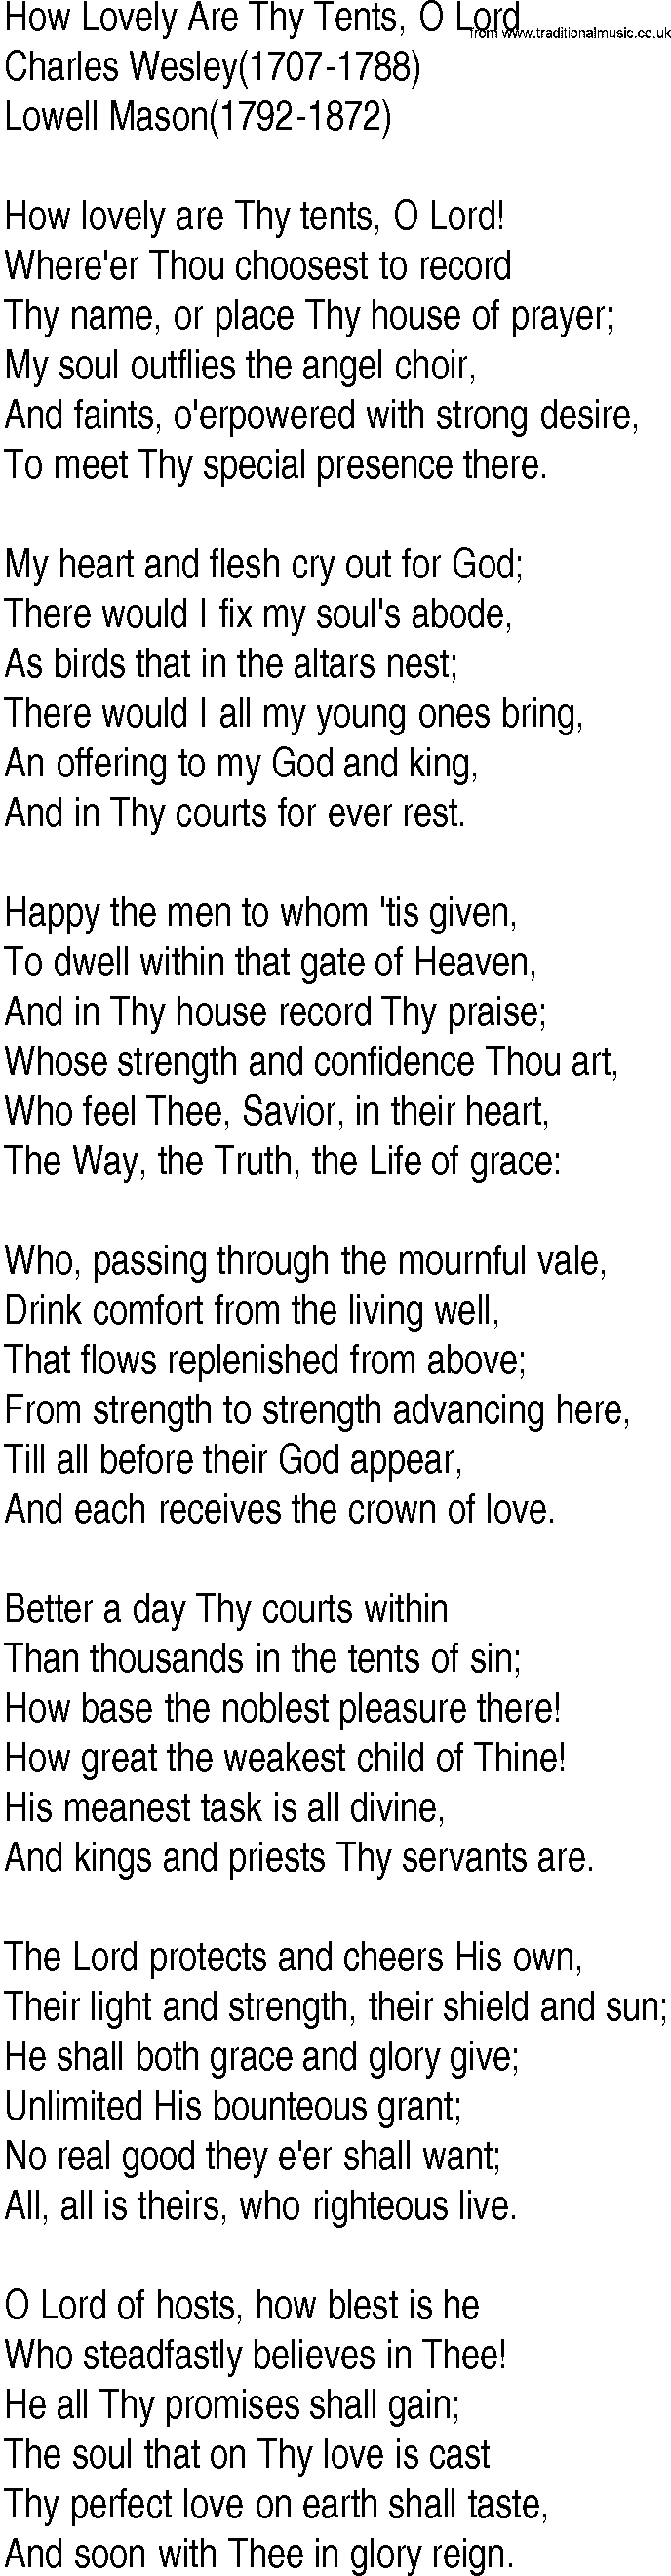 Hymn and Gospel Song Lyrics for How Lovely Are Thy Tents, O Lord by ...